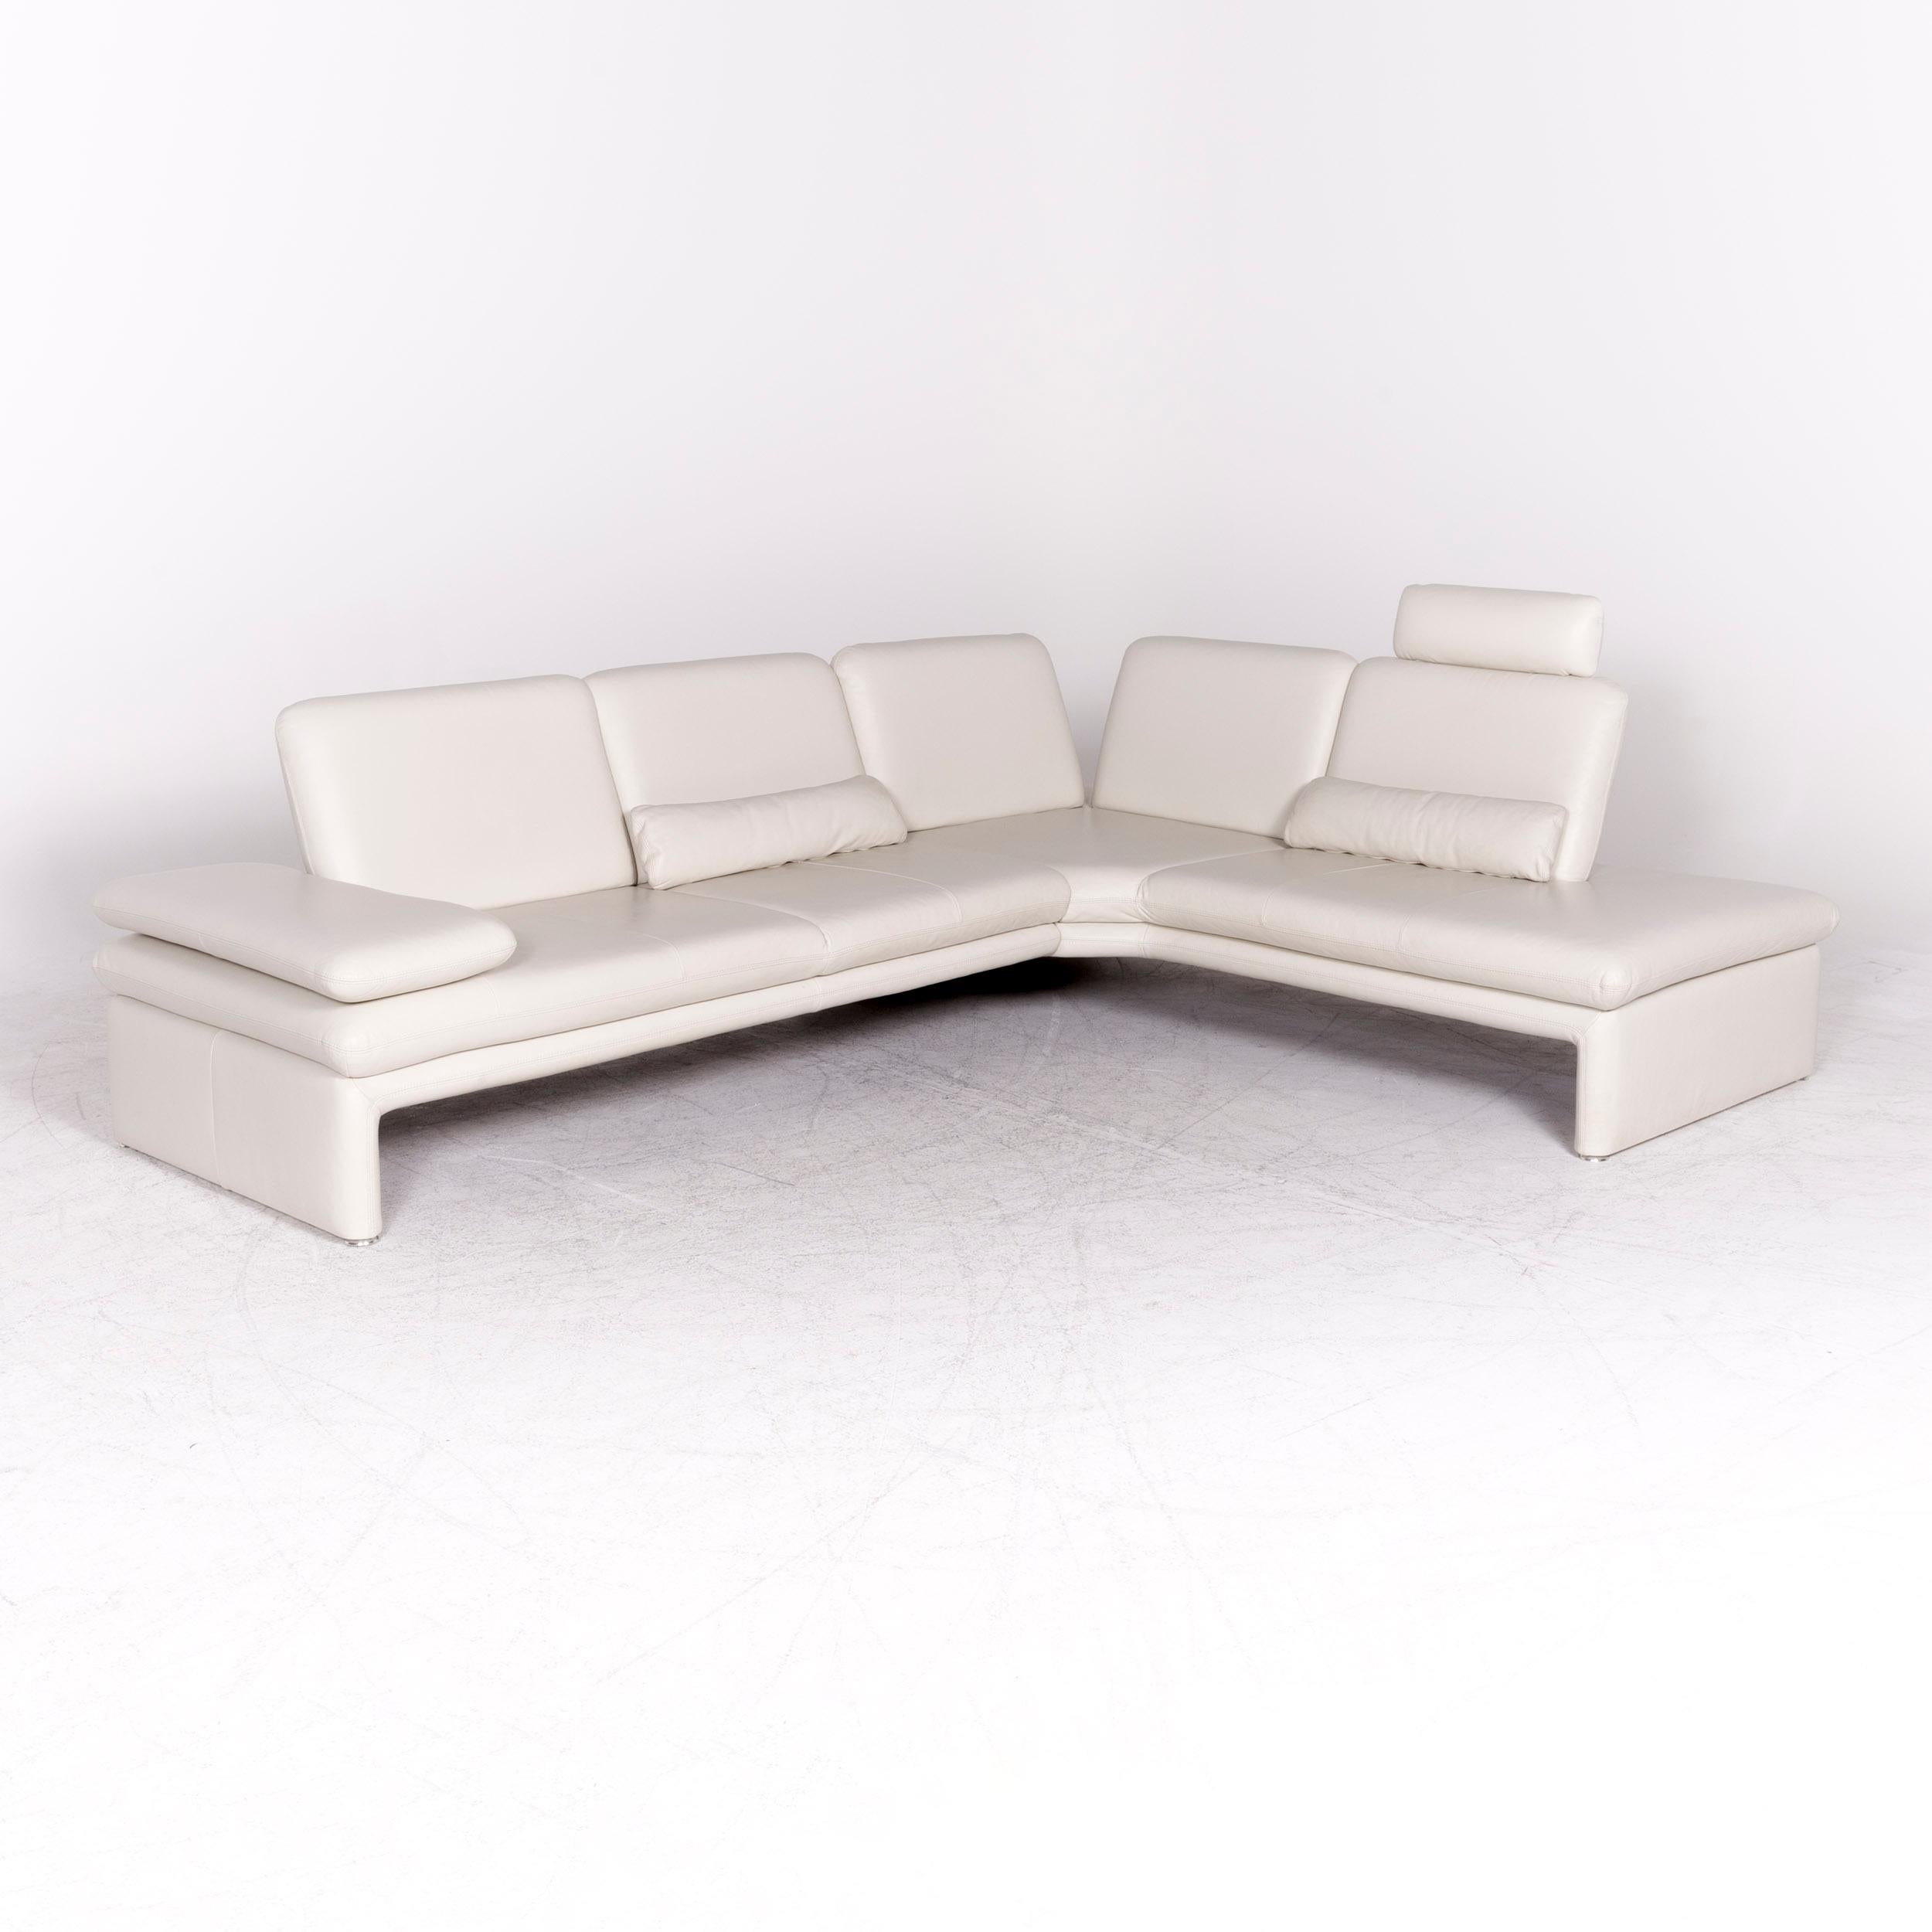 We bring to you a Willi Schillig Brooklyn designer leather corner sofa stool set genuine leather.

Product measurements in centimeters:

Depth 220
Width 282
Height 85
Seat-height 43
Rest-height 54
Seat-depth 57
Seat-width 238
Back-height